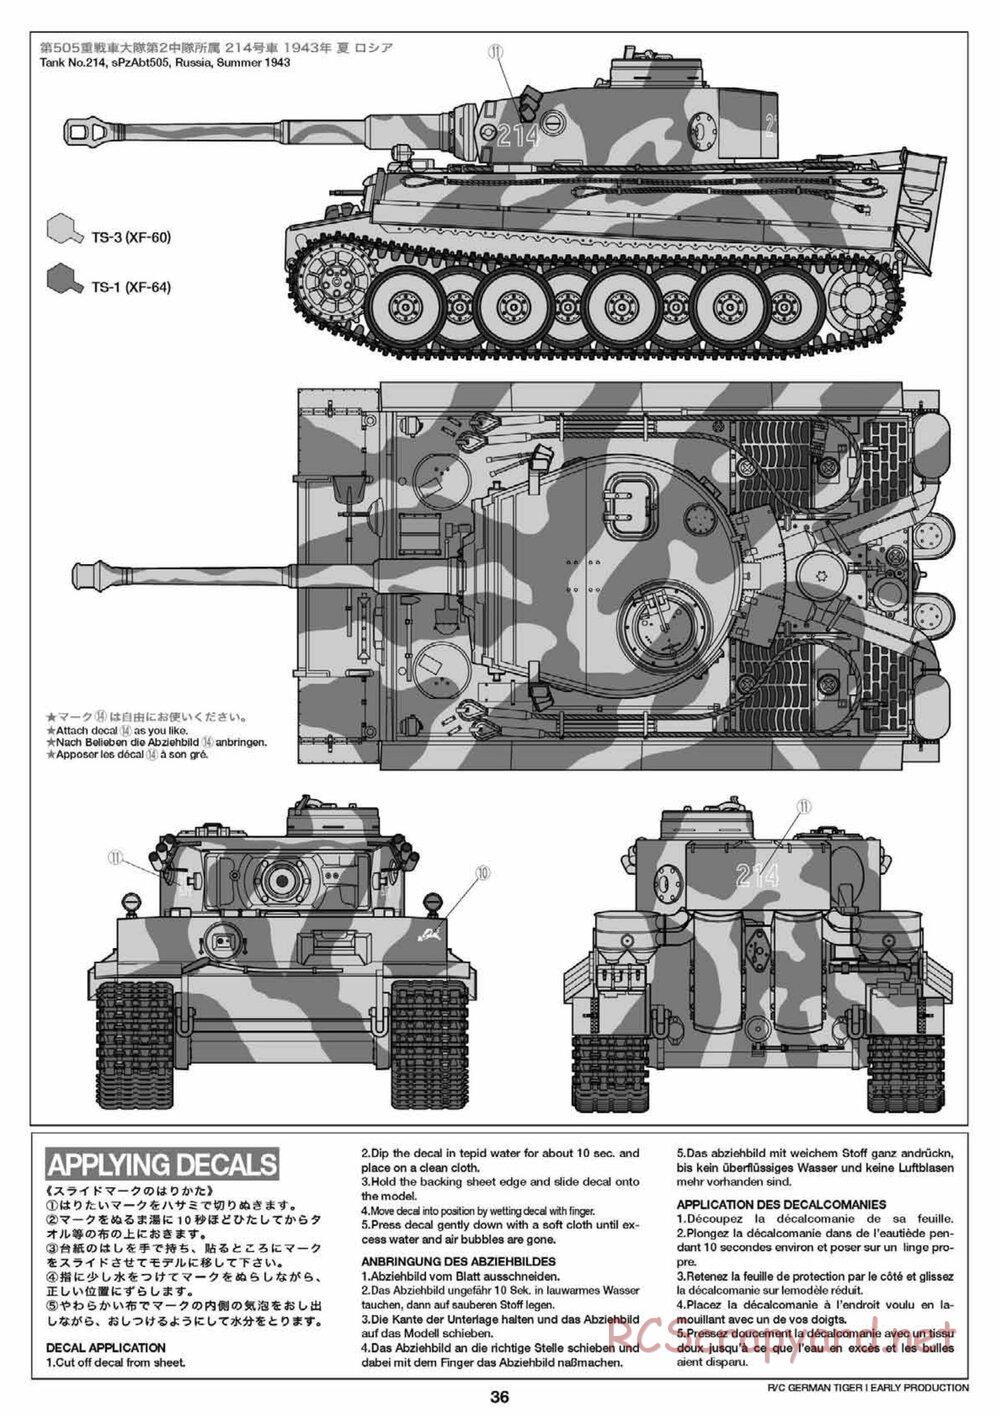 Tamiya - Tiger I Early Production - 1/16 Scale Chassis - Manual - Page 36